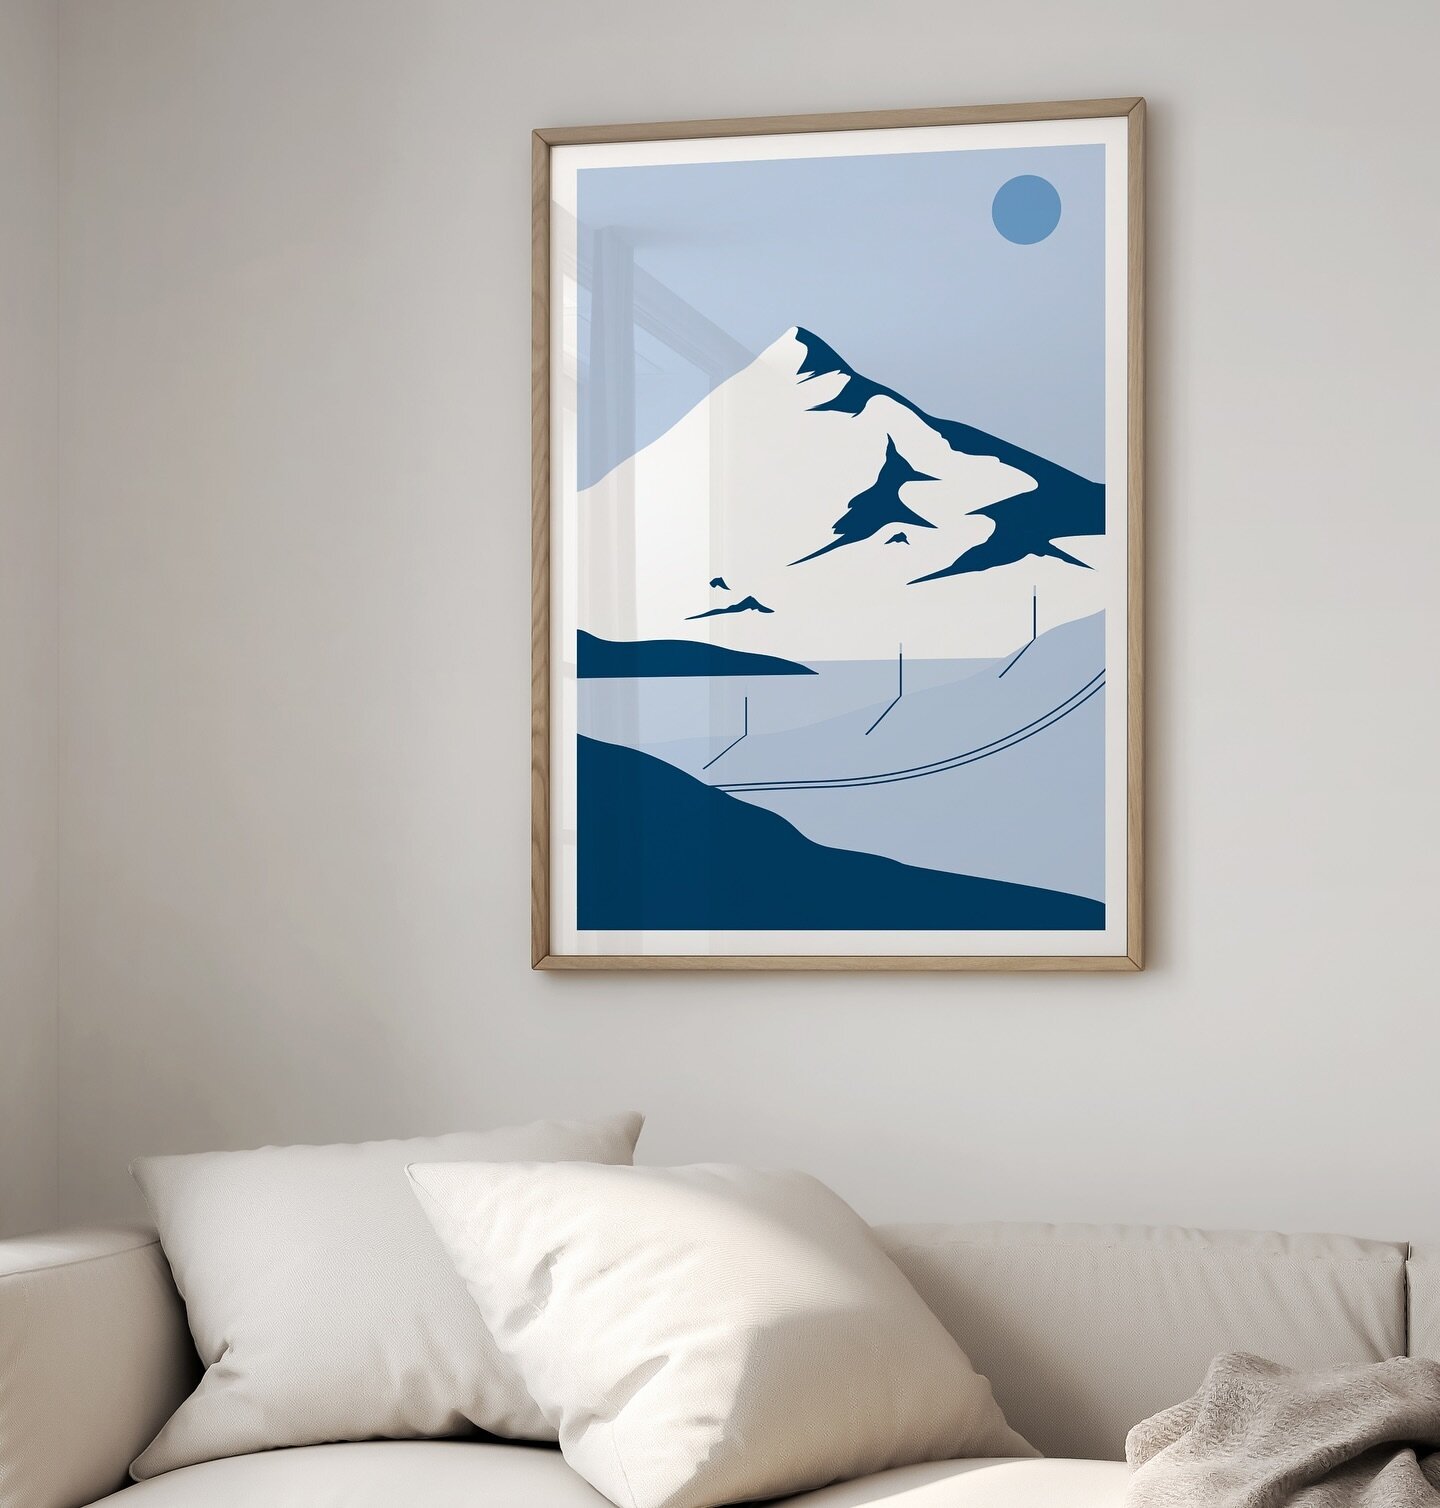 February half term is here and so is skiing season! Is anyone going to the mountains this year? Let us know your favourite resort. We have lots of lovely skiing and mountain prints in our shop head over and have a look. If you&rsquo;ve read this far 